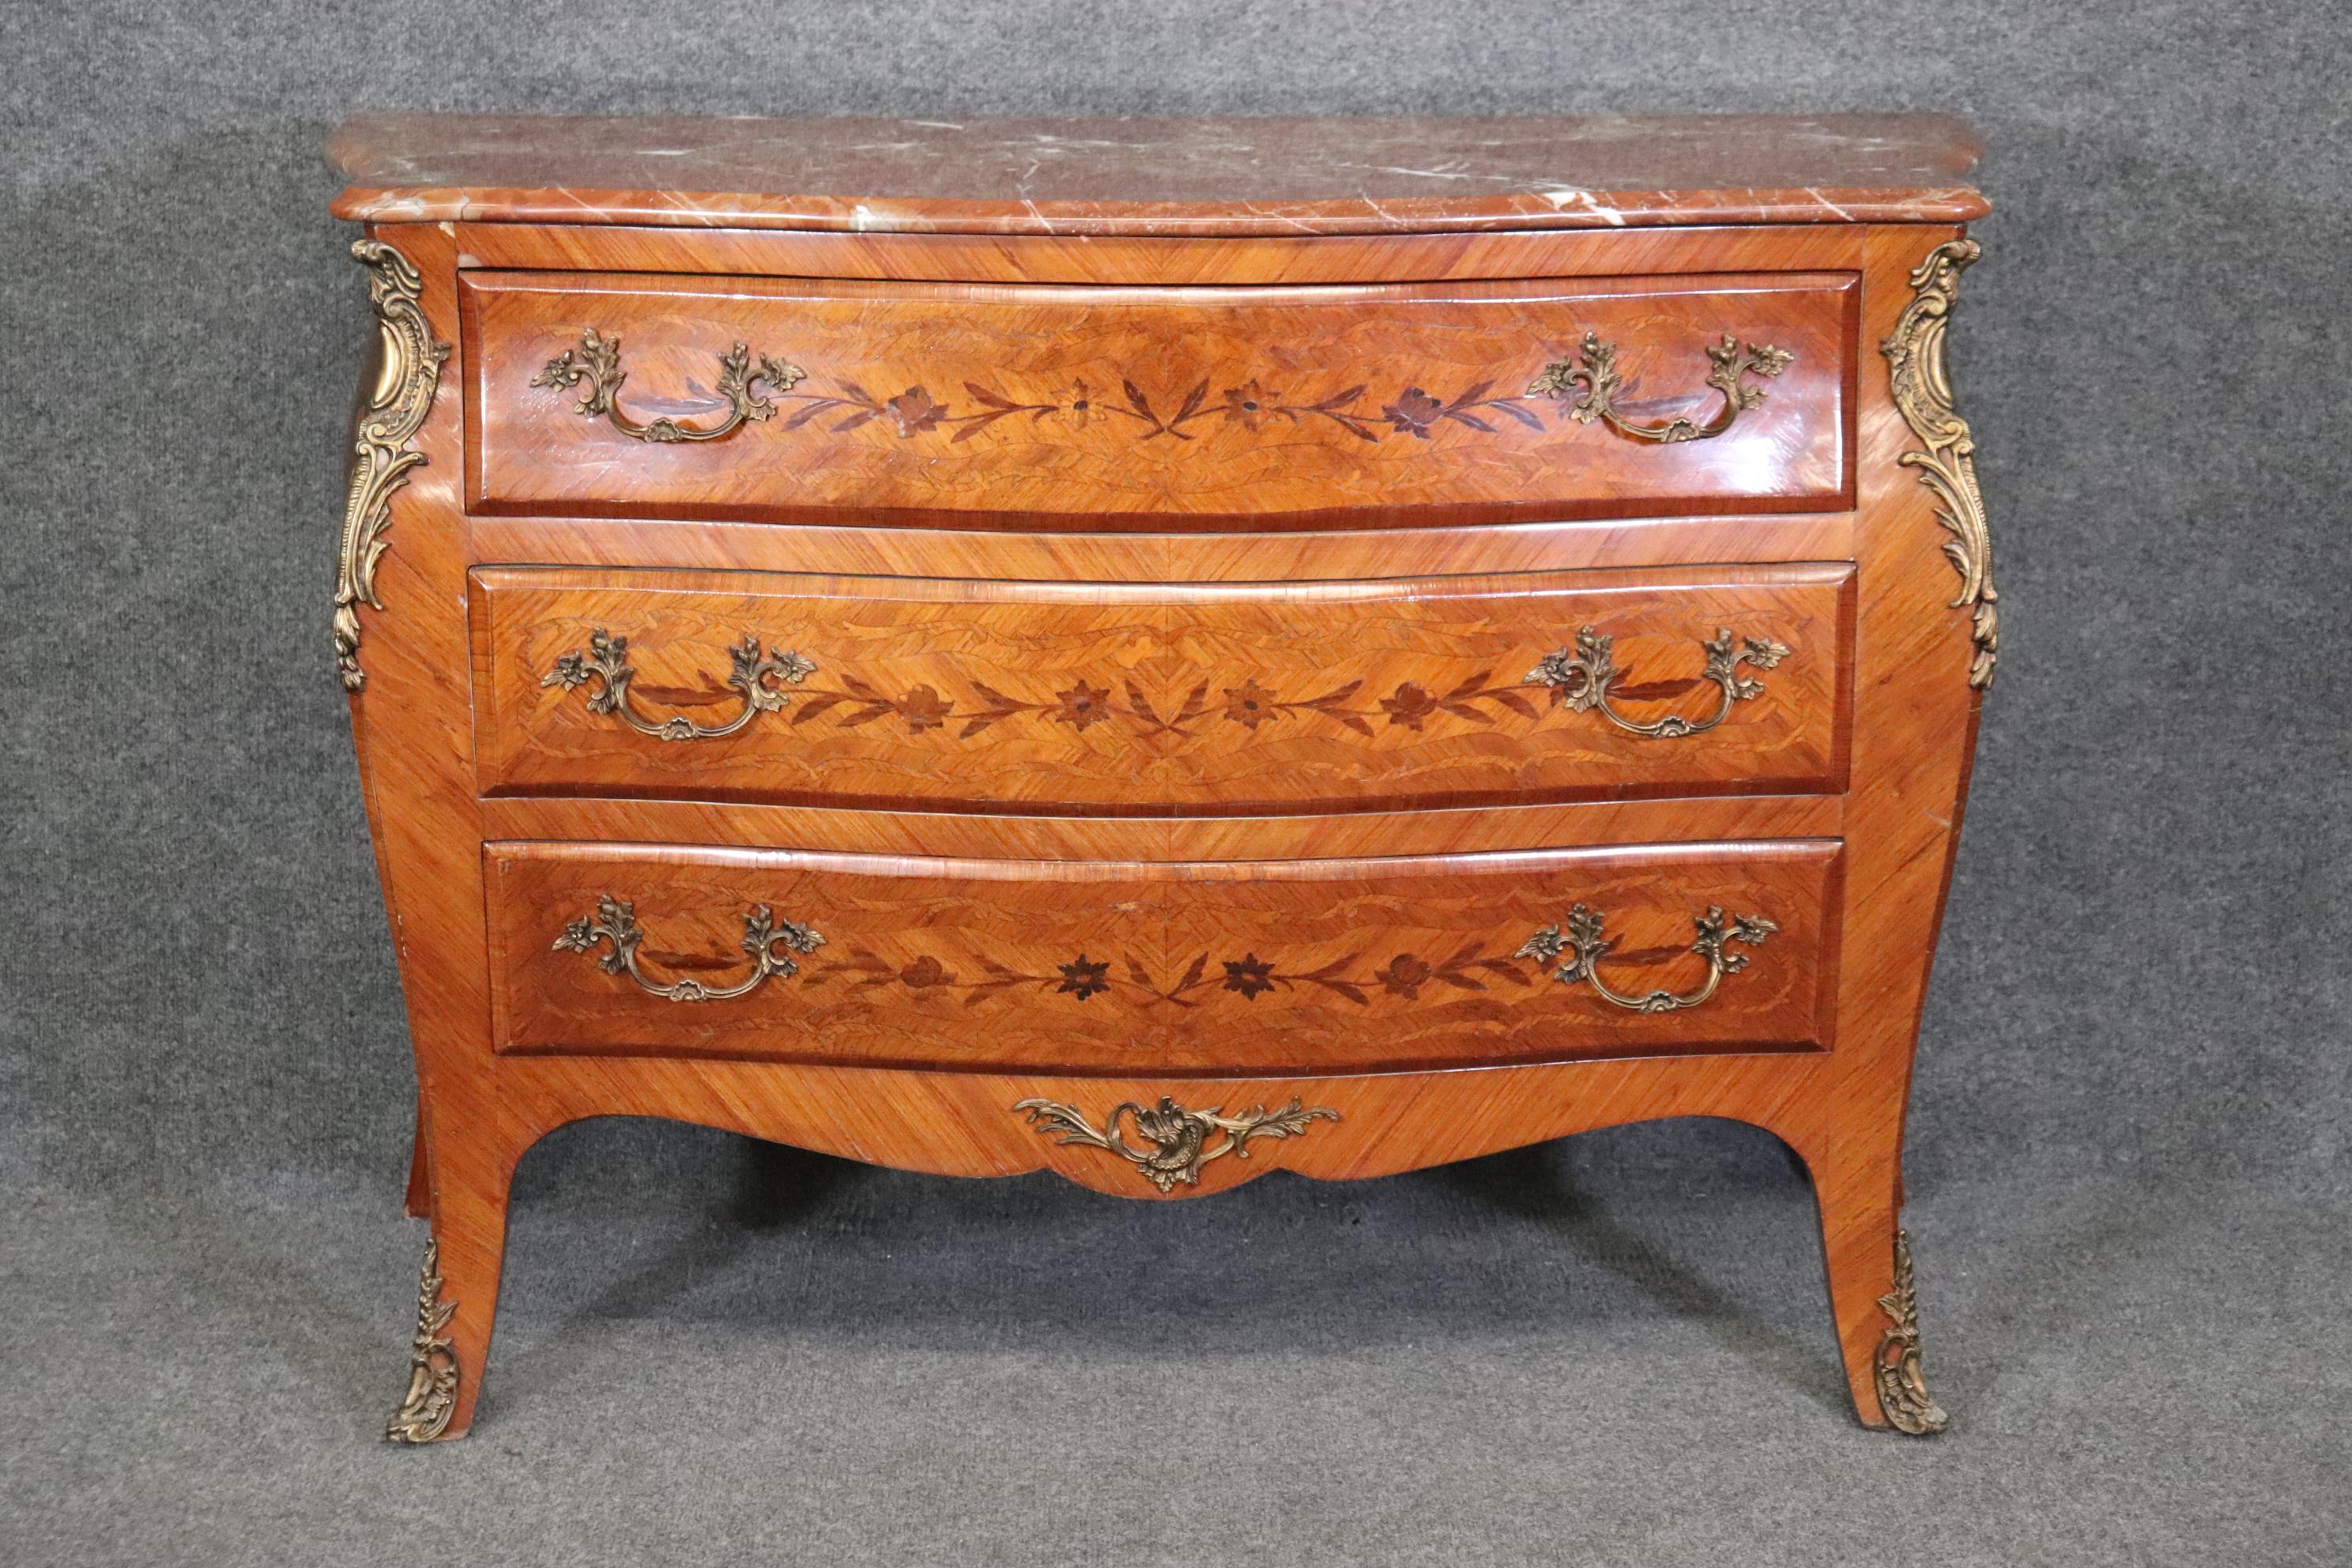 This is a beautiful marble top commode in the Louis XV style with a beautiful marble top and gorgeous wood quality. The piece features beautiful inlay and harmonious coloration between the woods and the marble. The piece is in good condition and